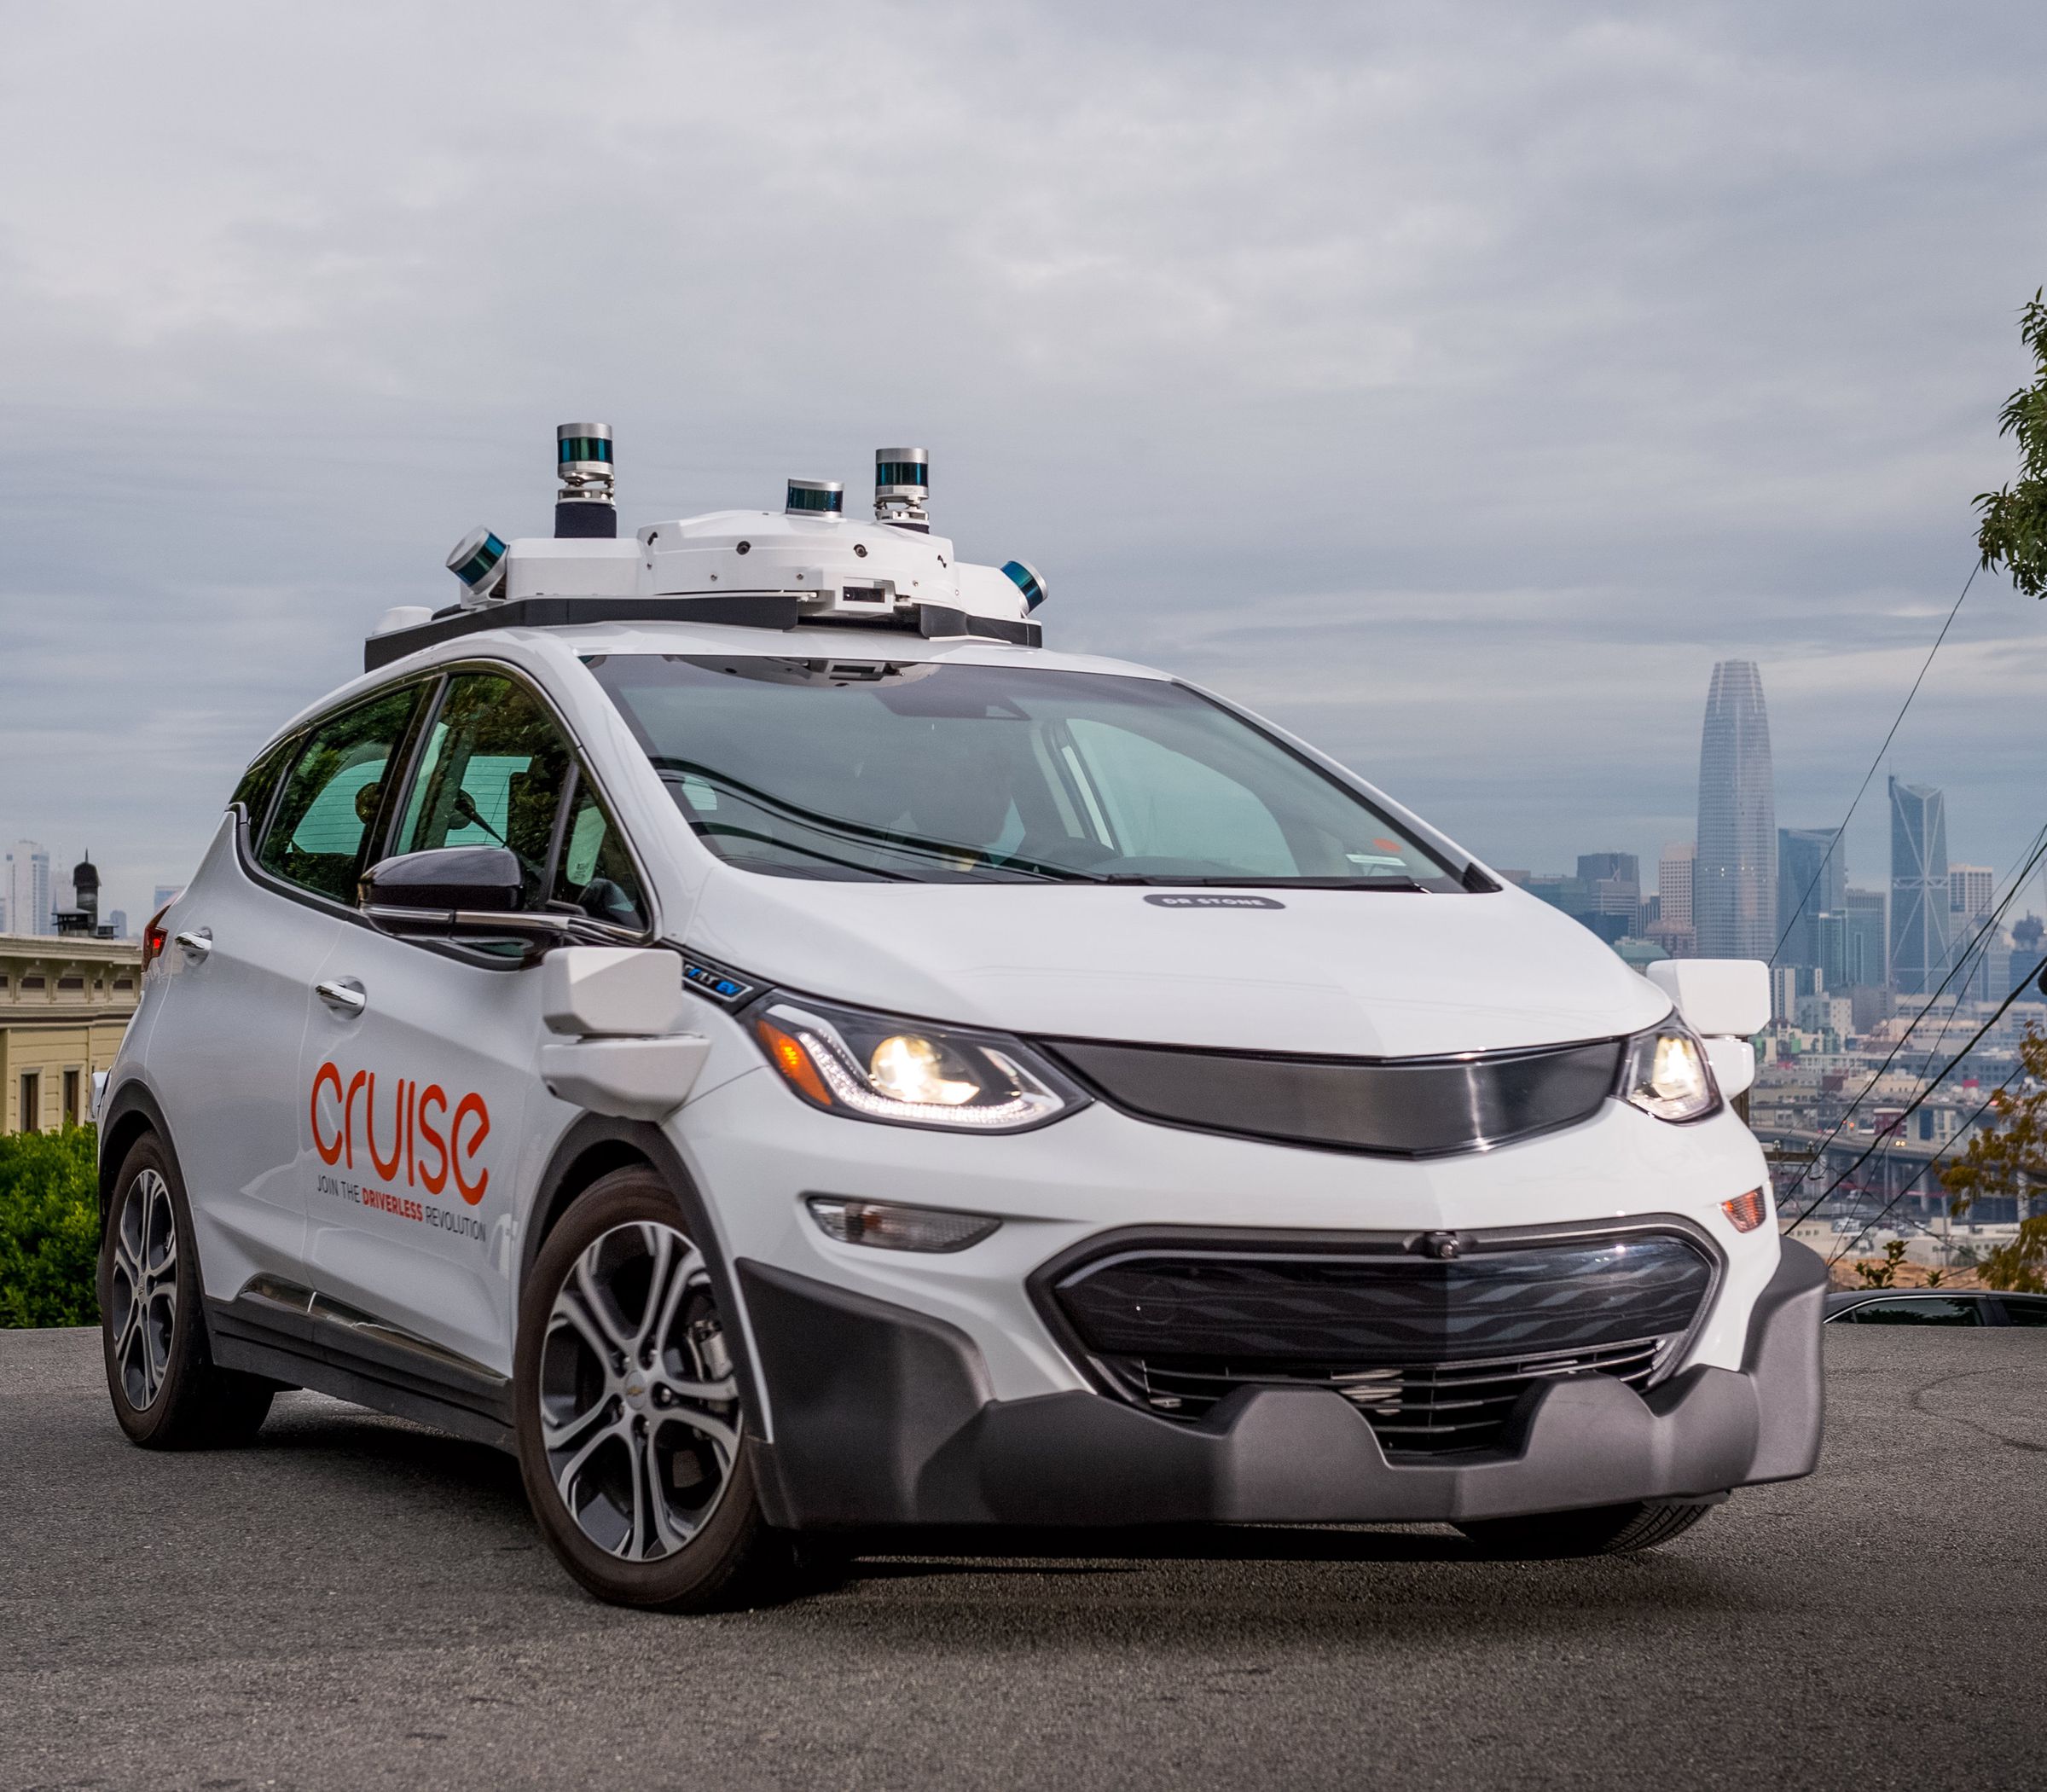 Cruise self-driving test vehicle navigates the urban streets of San Francisco, California. (Photo by Karl Nielsen)